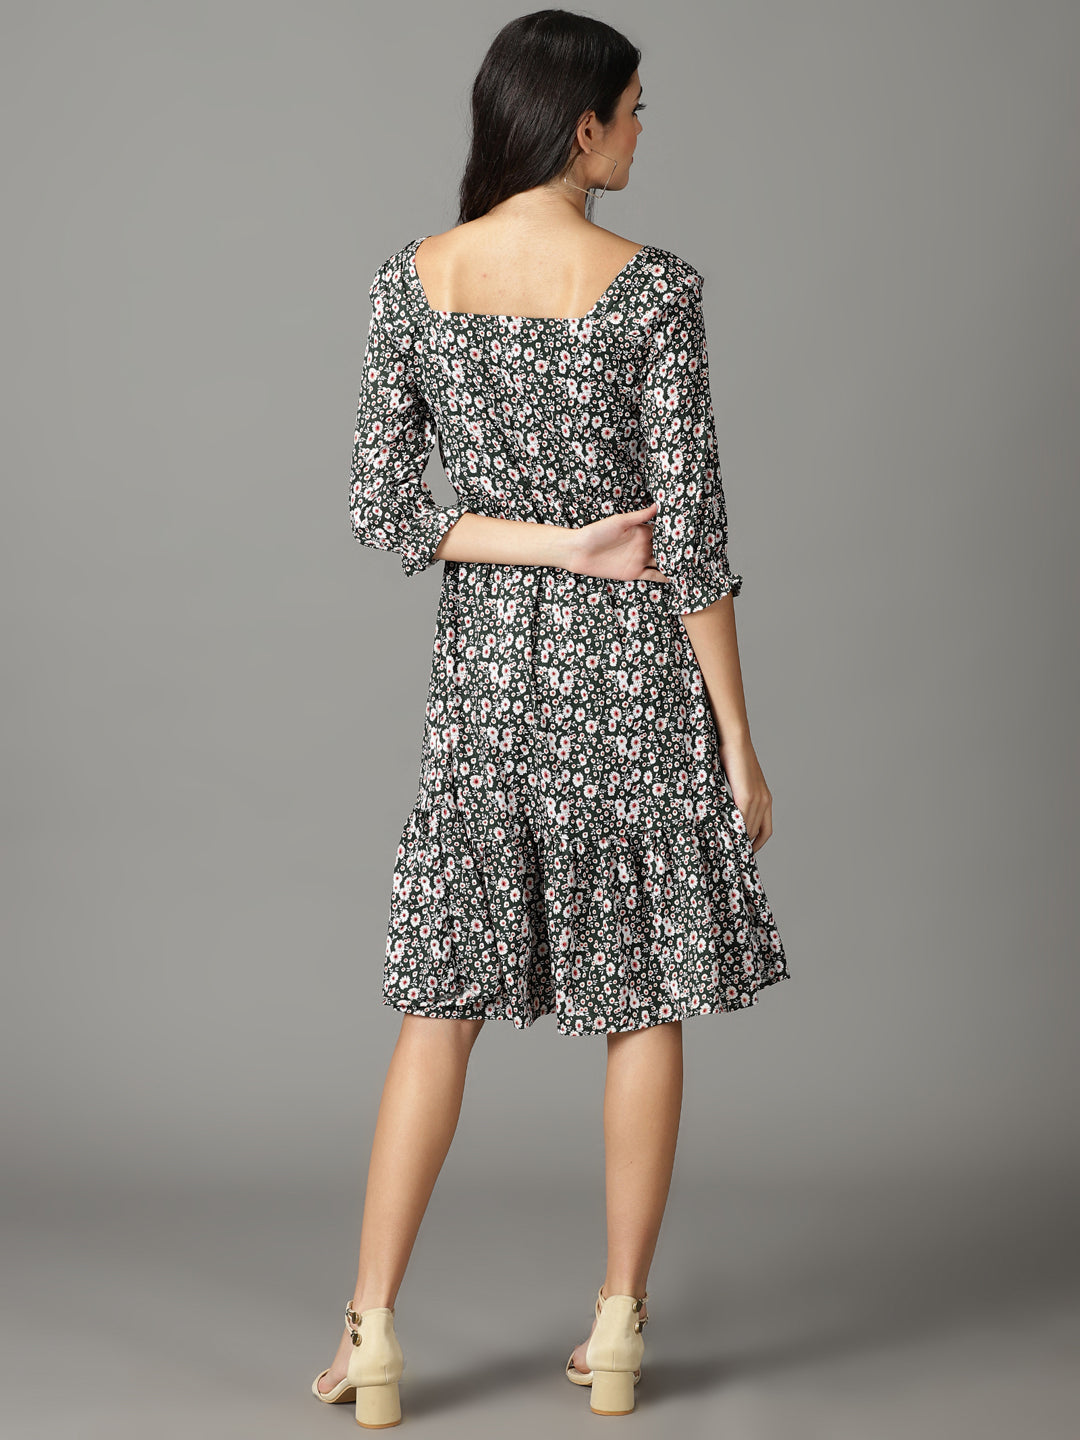 Women's Olive Printed Fit and Flare Dress